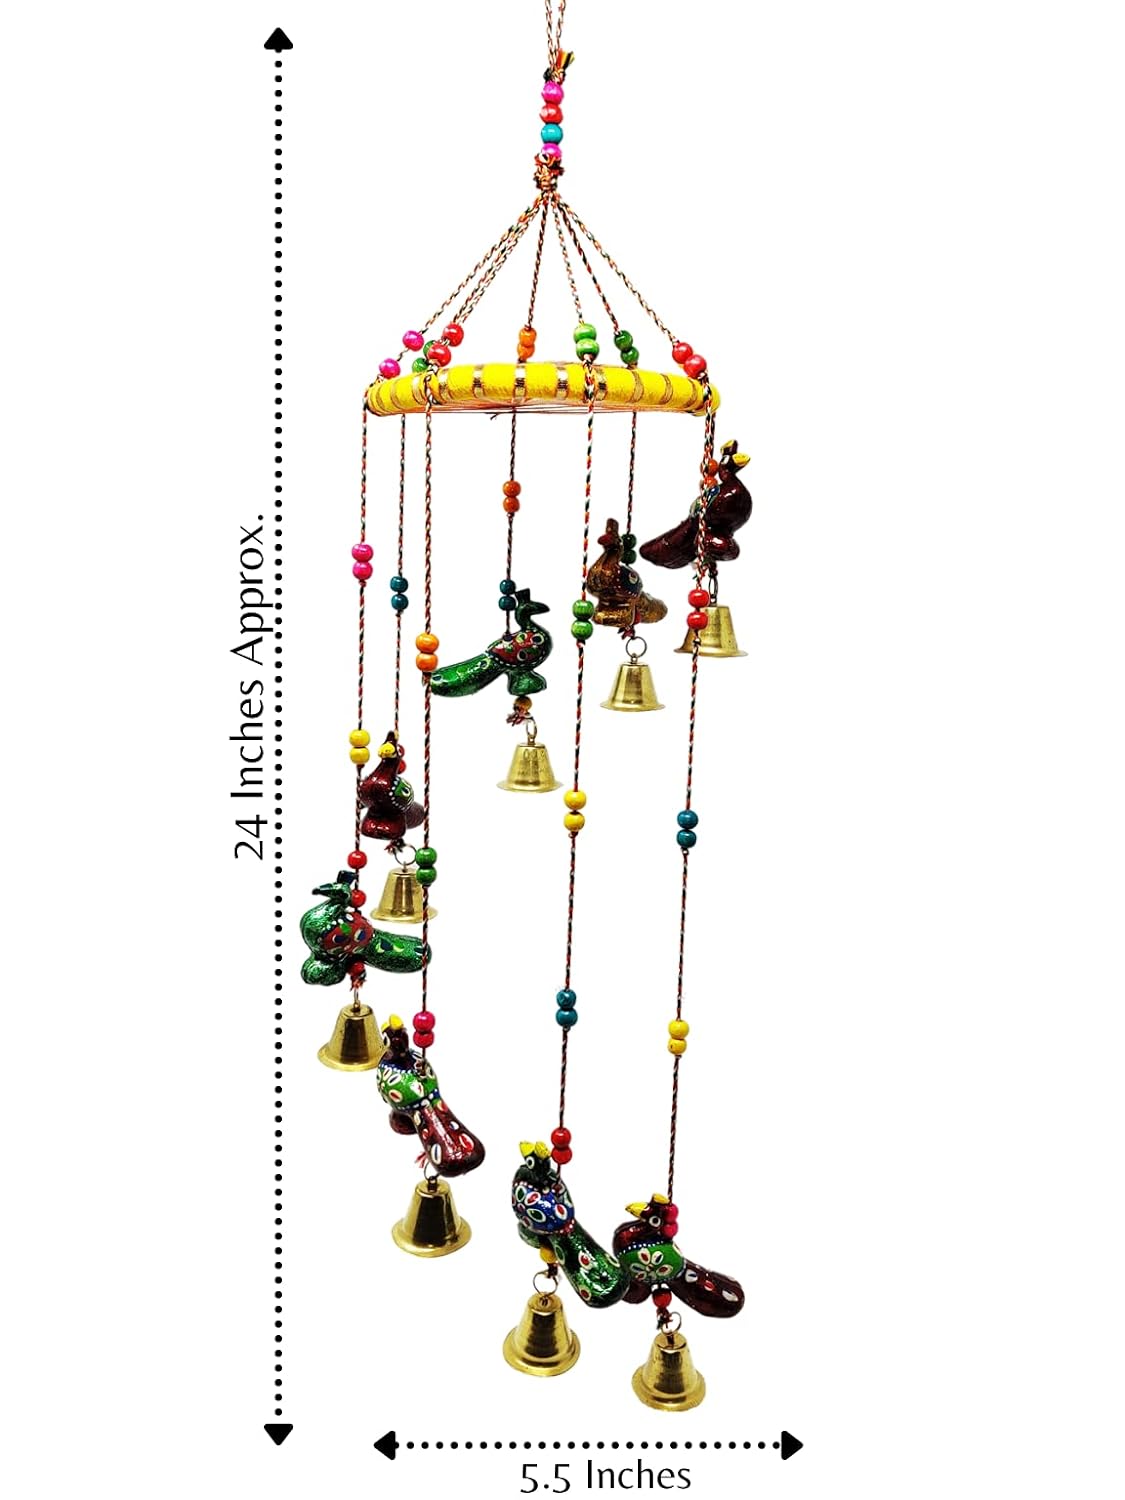 Decorative Wind Chime Home Decor Wind Chimes for Home H -25 Inches, W -5.5 Inches